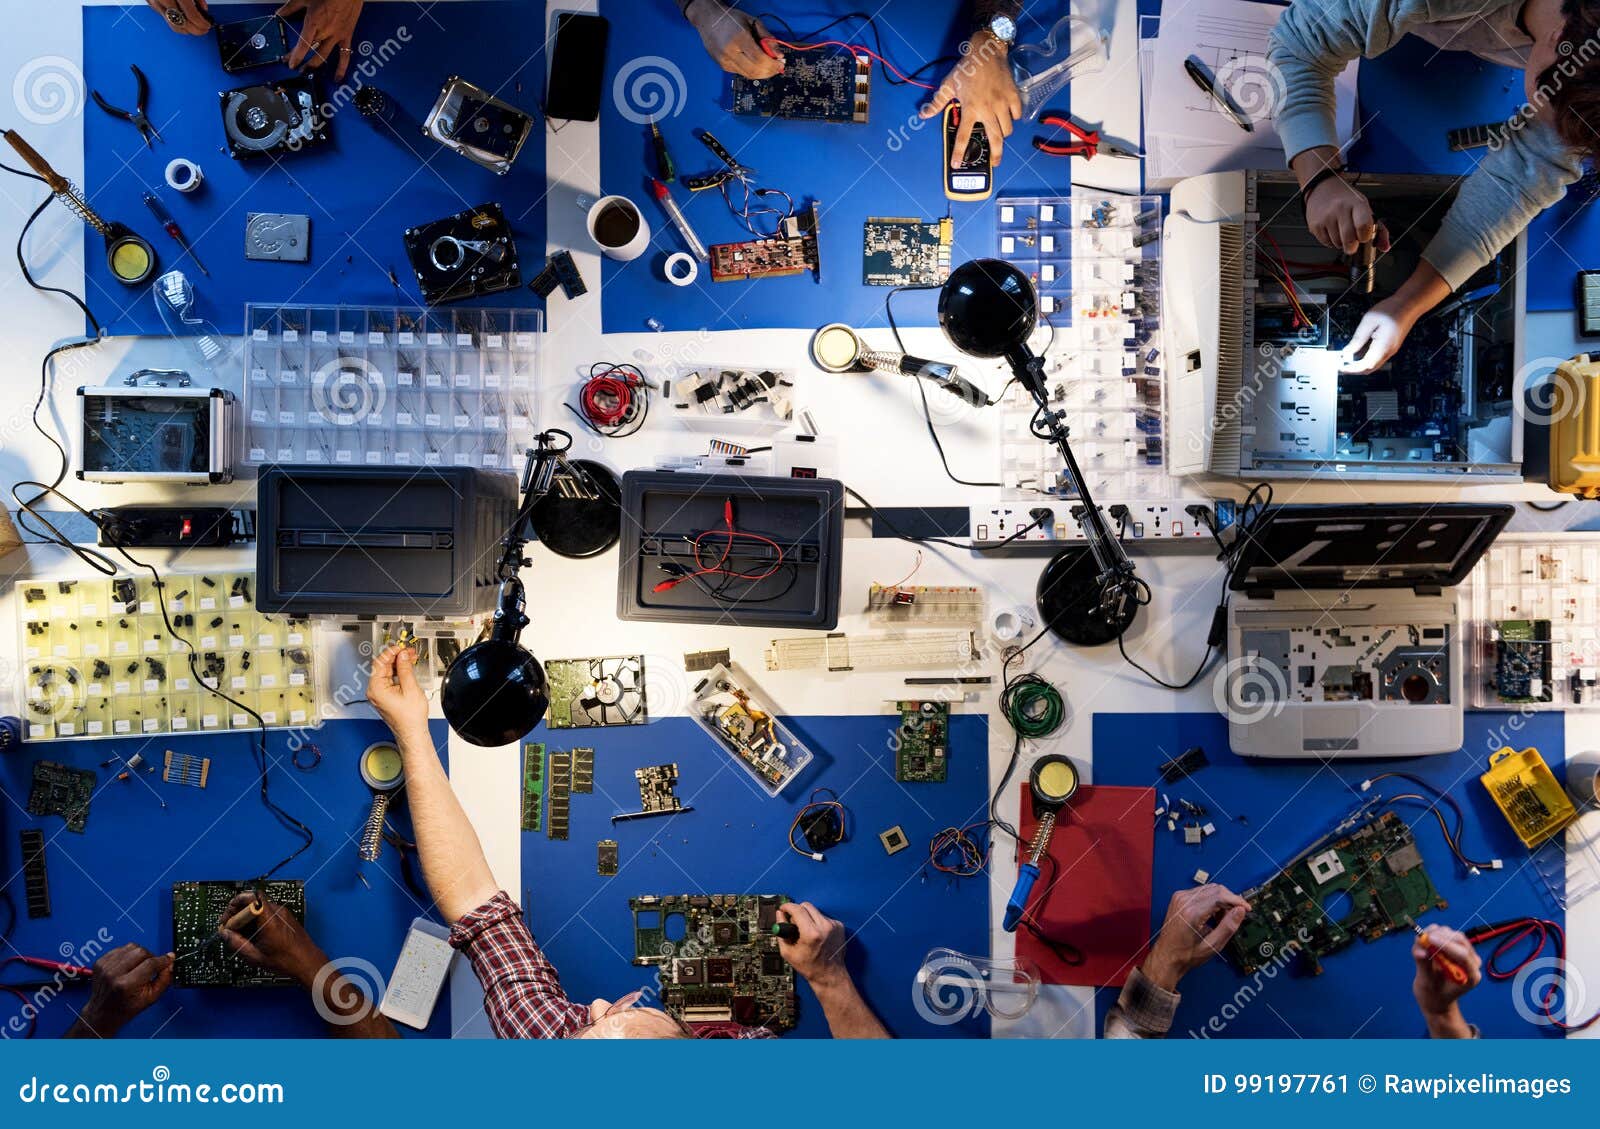 aerial view of electronics technicians team working